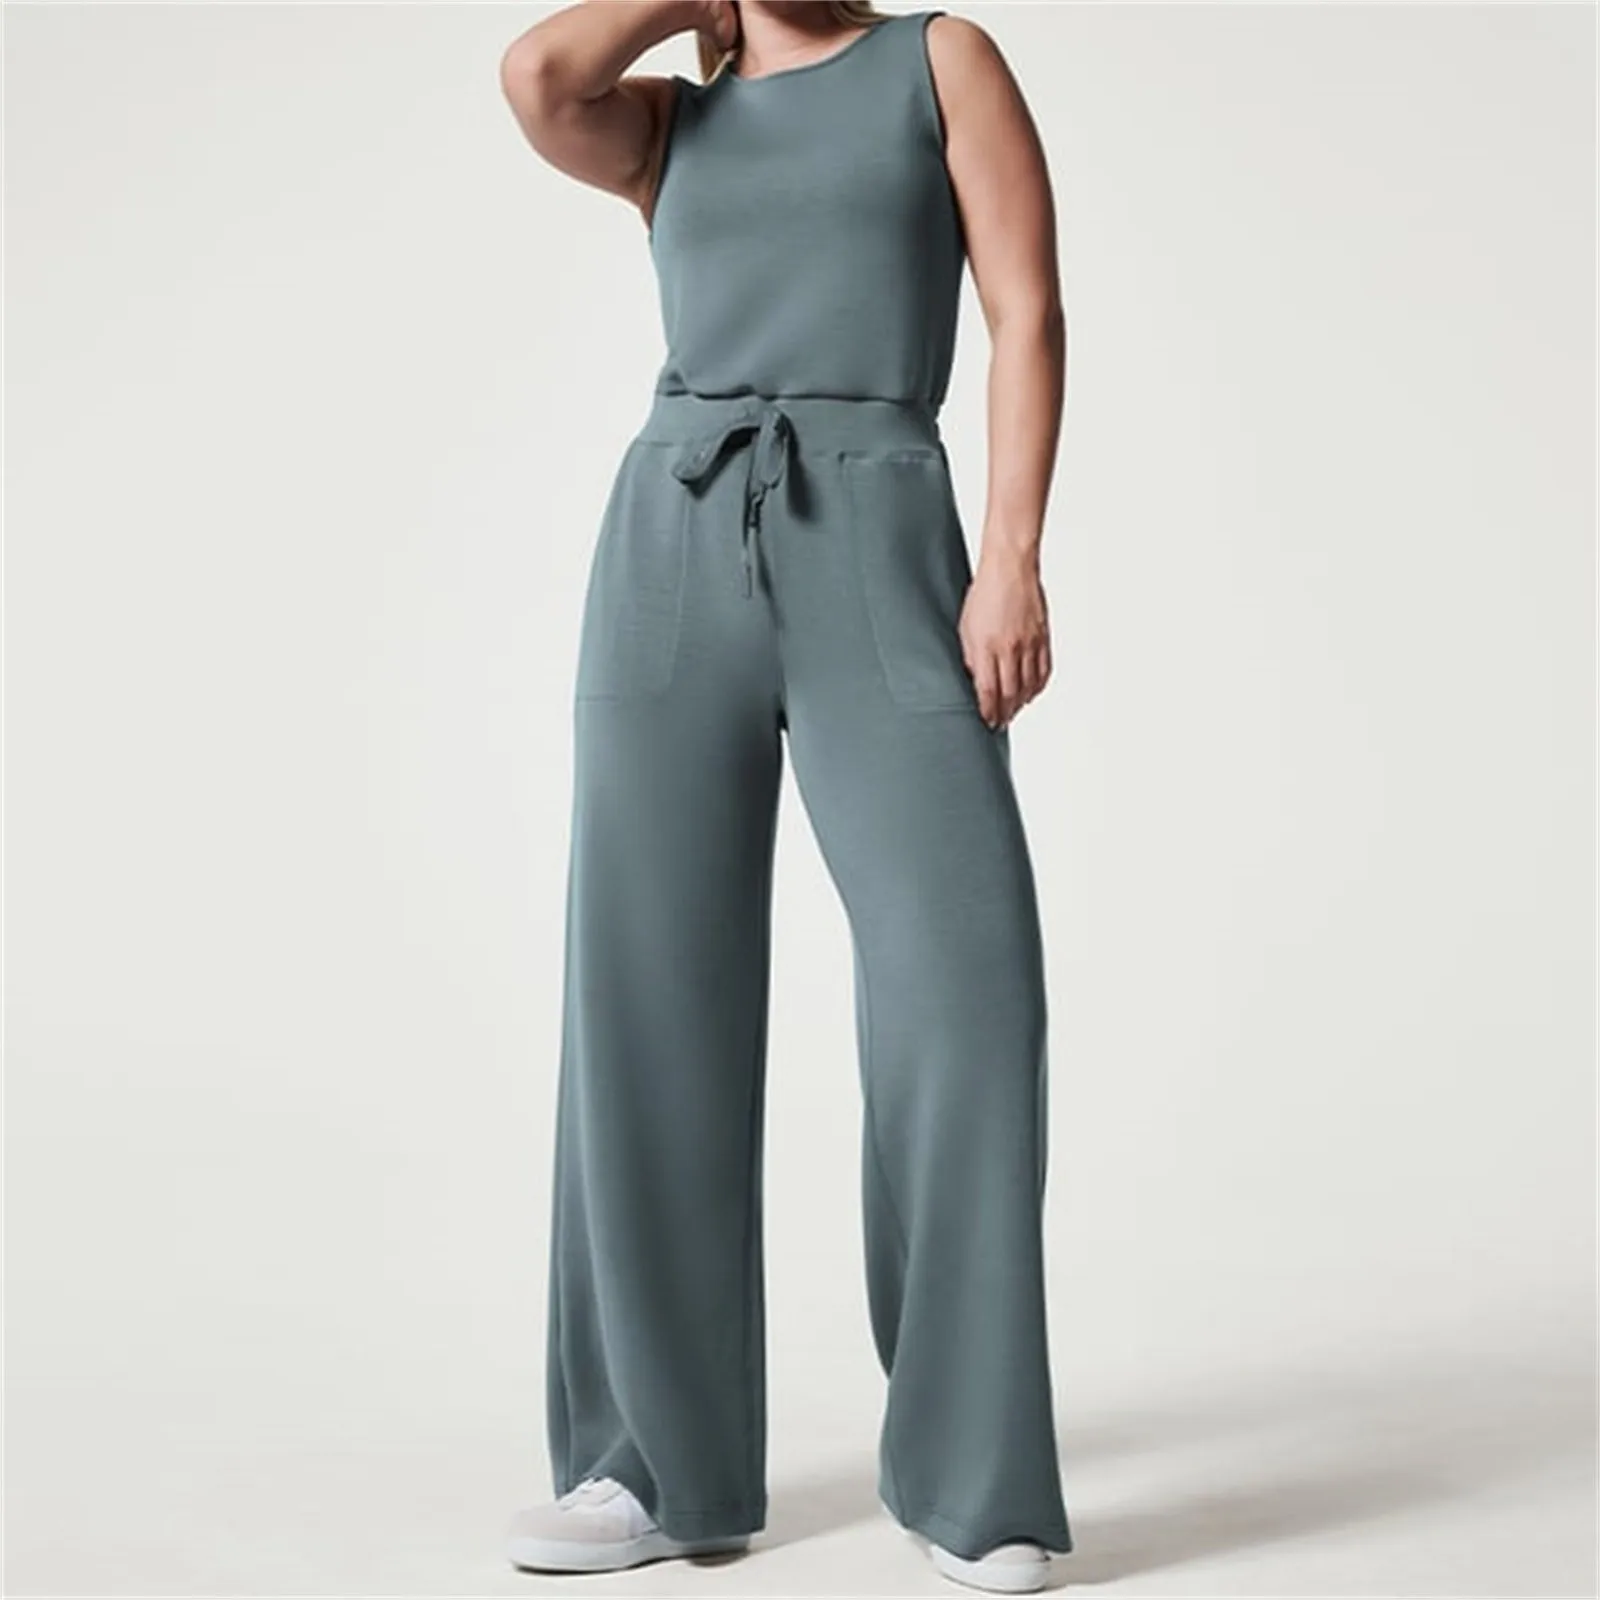 2023 New Jumpsuits for Women Casual Air Essentials Jumpsuit Ladies Summer Sleeveless Jumpsuit with Pockets Belted Wide Leg Pant women oversized solid jumpsuits sleeveless pockets playsuit ladies summer loose rompers straps wide leg short fashion suspender